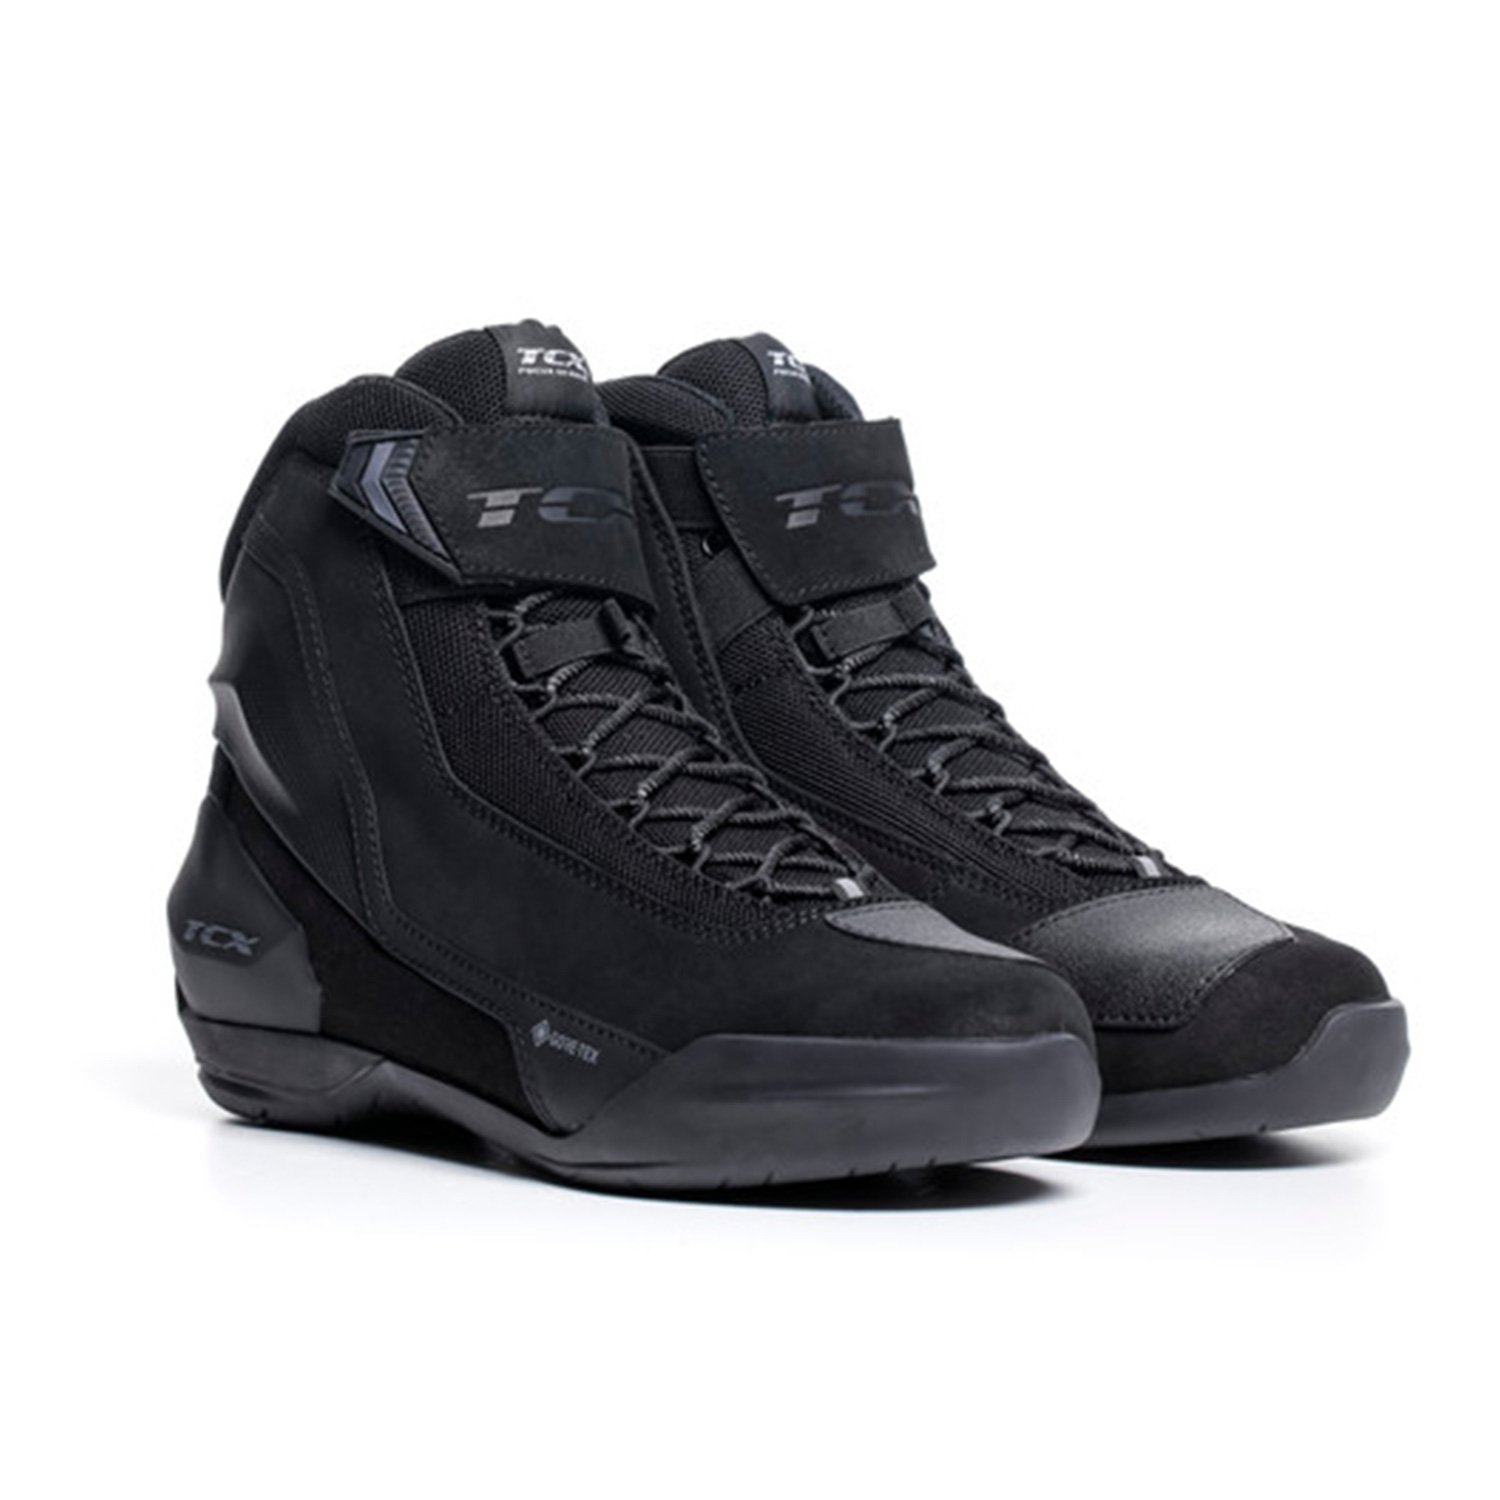 Image of TCX Jupiter 5 Gore-Tex Noir Chaussures Taille 39